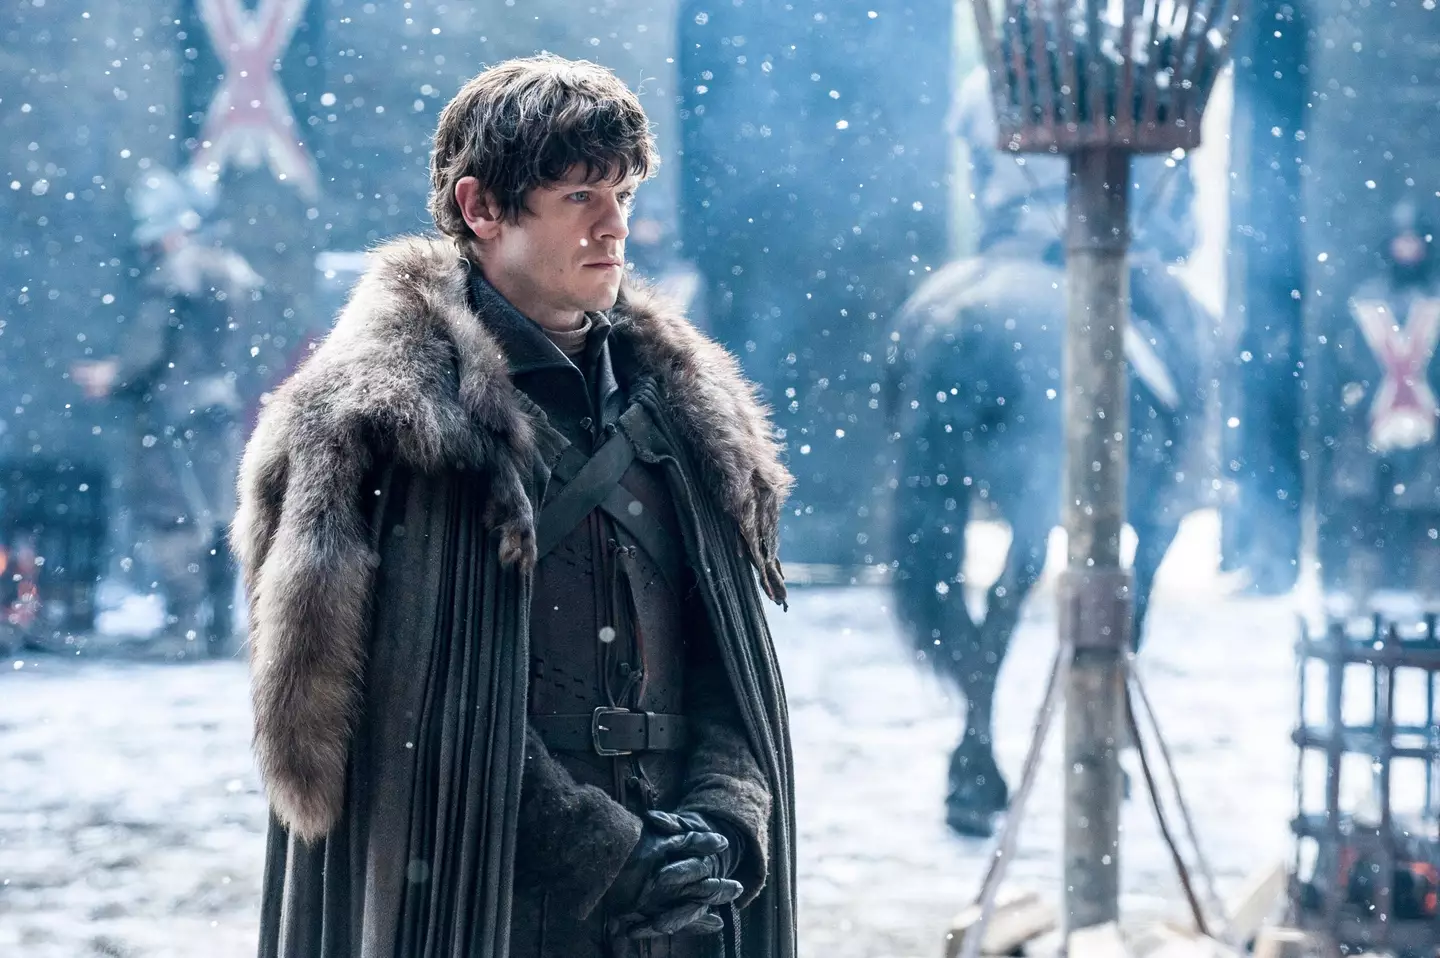 Iwan Rheon is probably best known for his villainous turn in Game of Thrones.